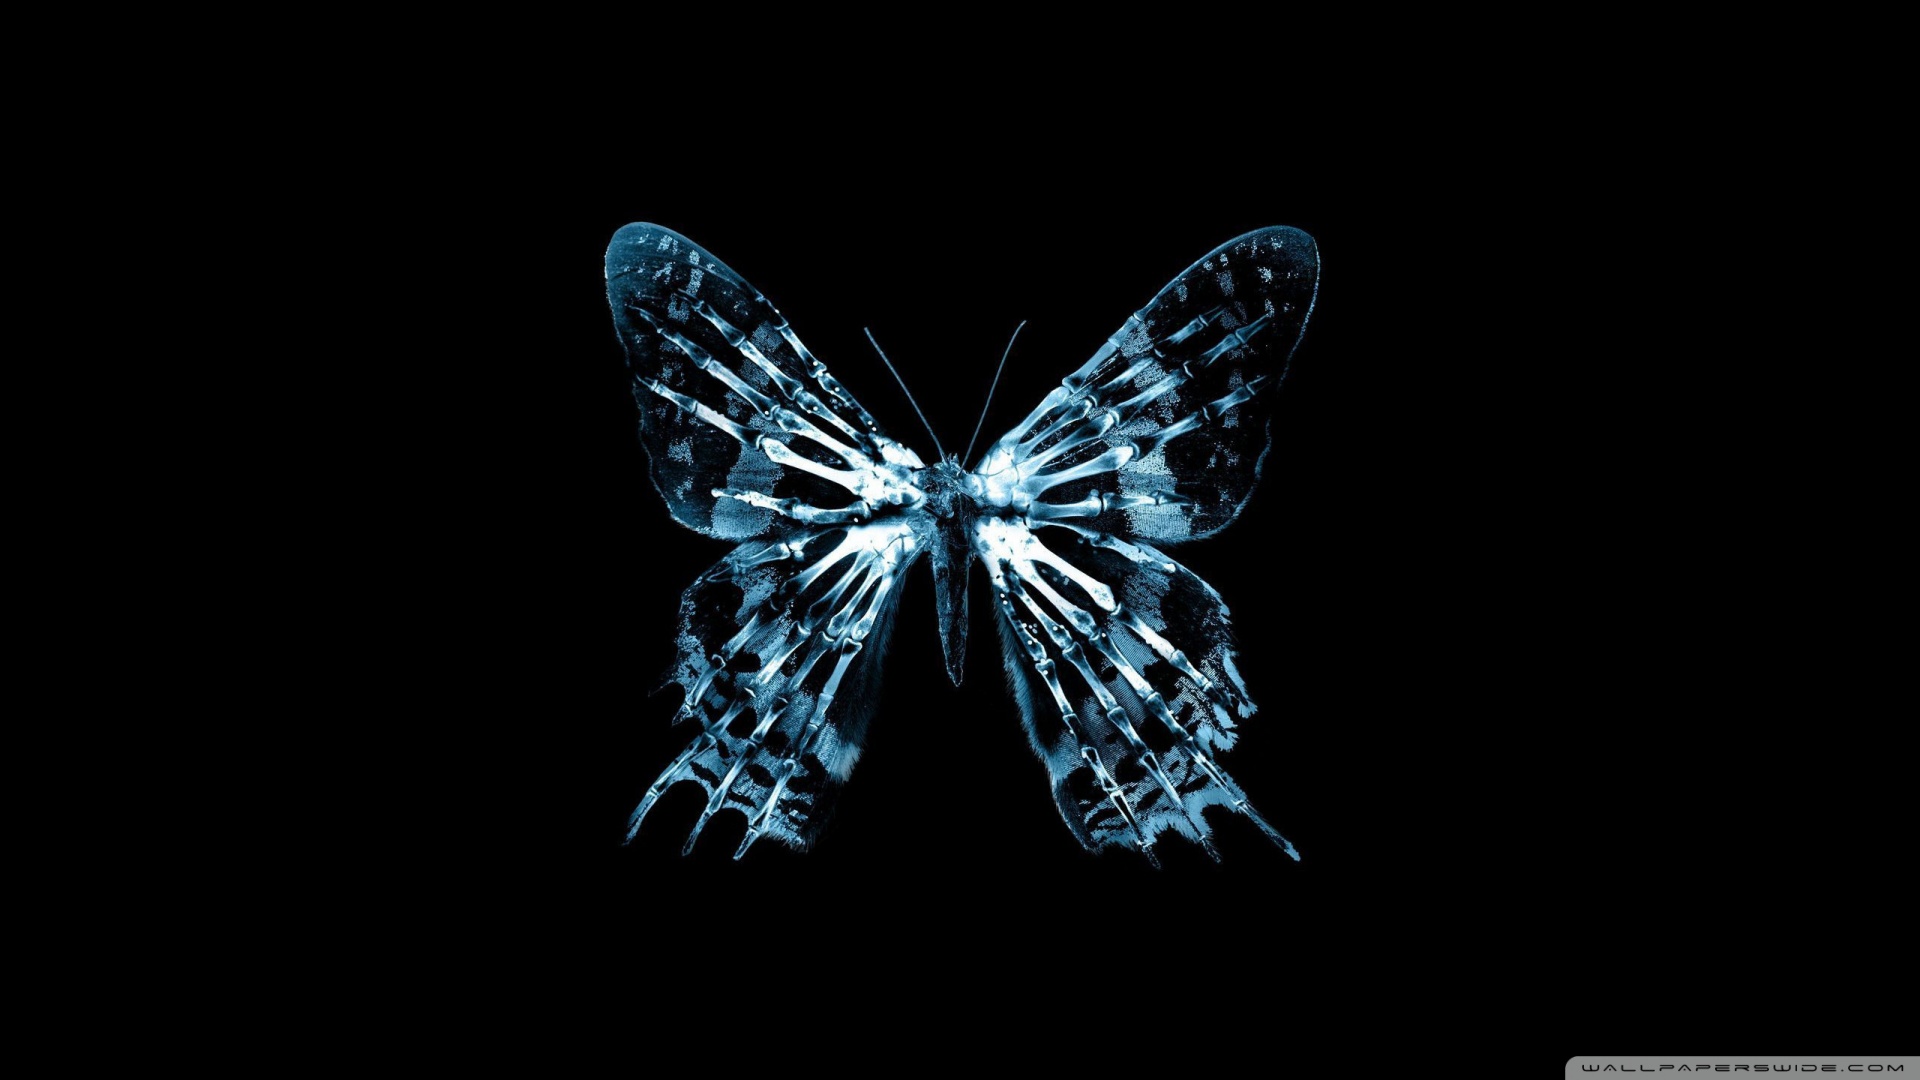 Butterfly X Ray Wallpaper 1920x1080 Butterfly X Ray